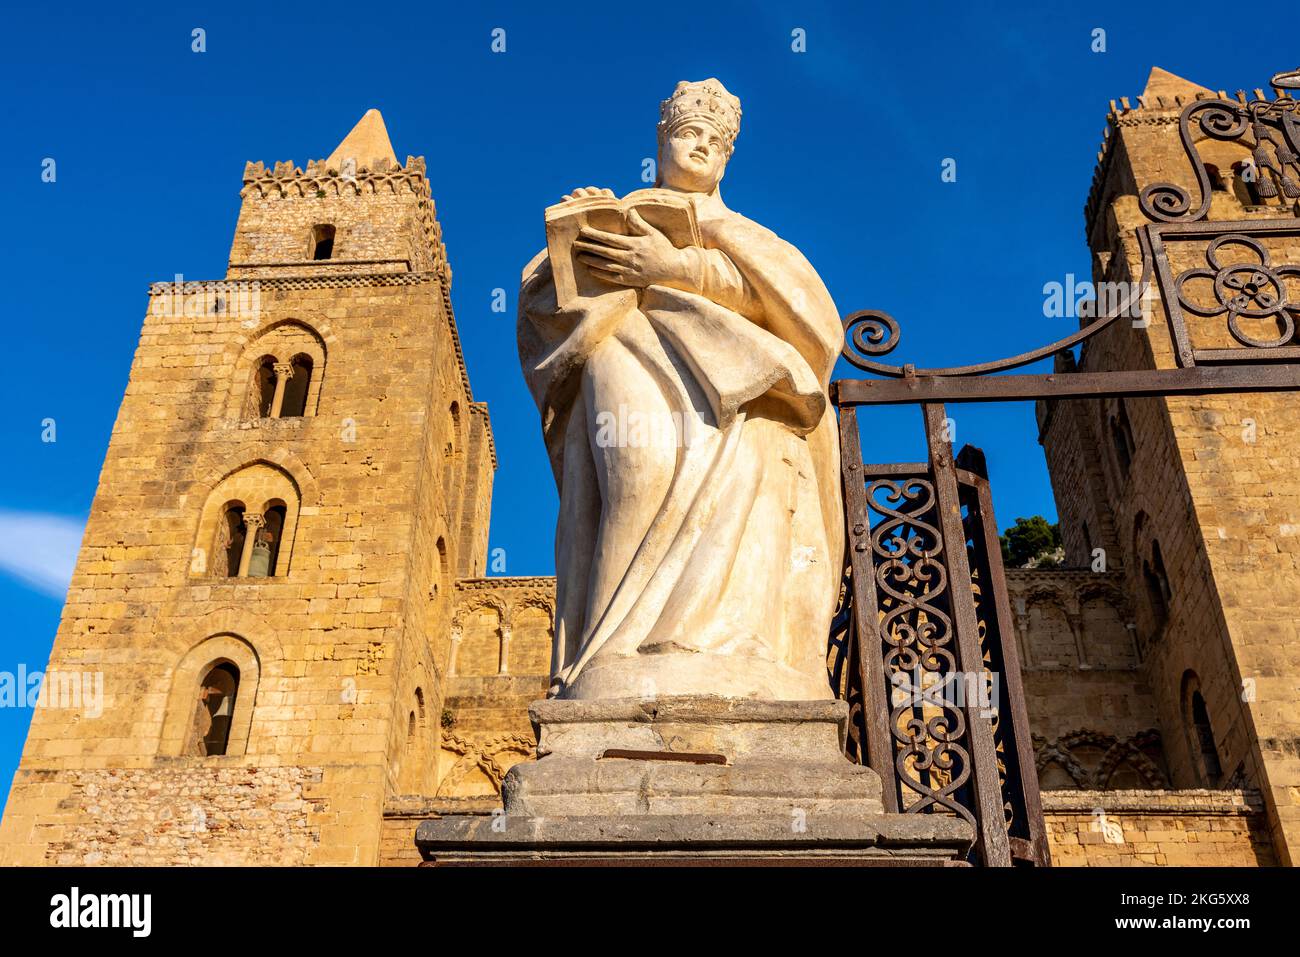 The Exterior Of The Cathedral of Cefalu, Cefalu, Sicily, Italy. Stock Photo